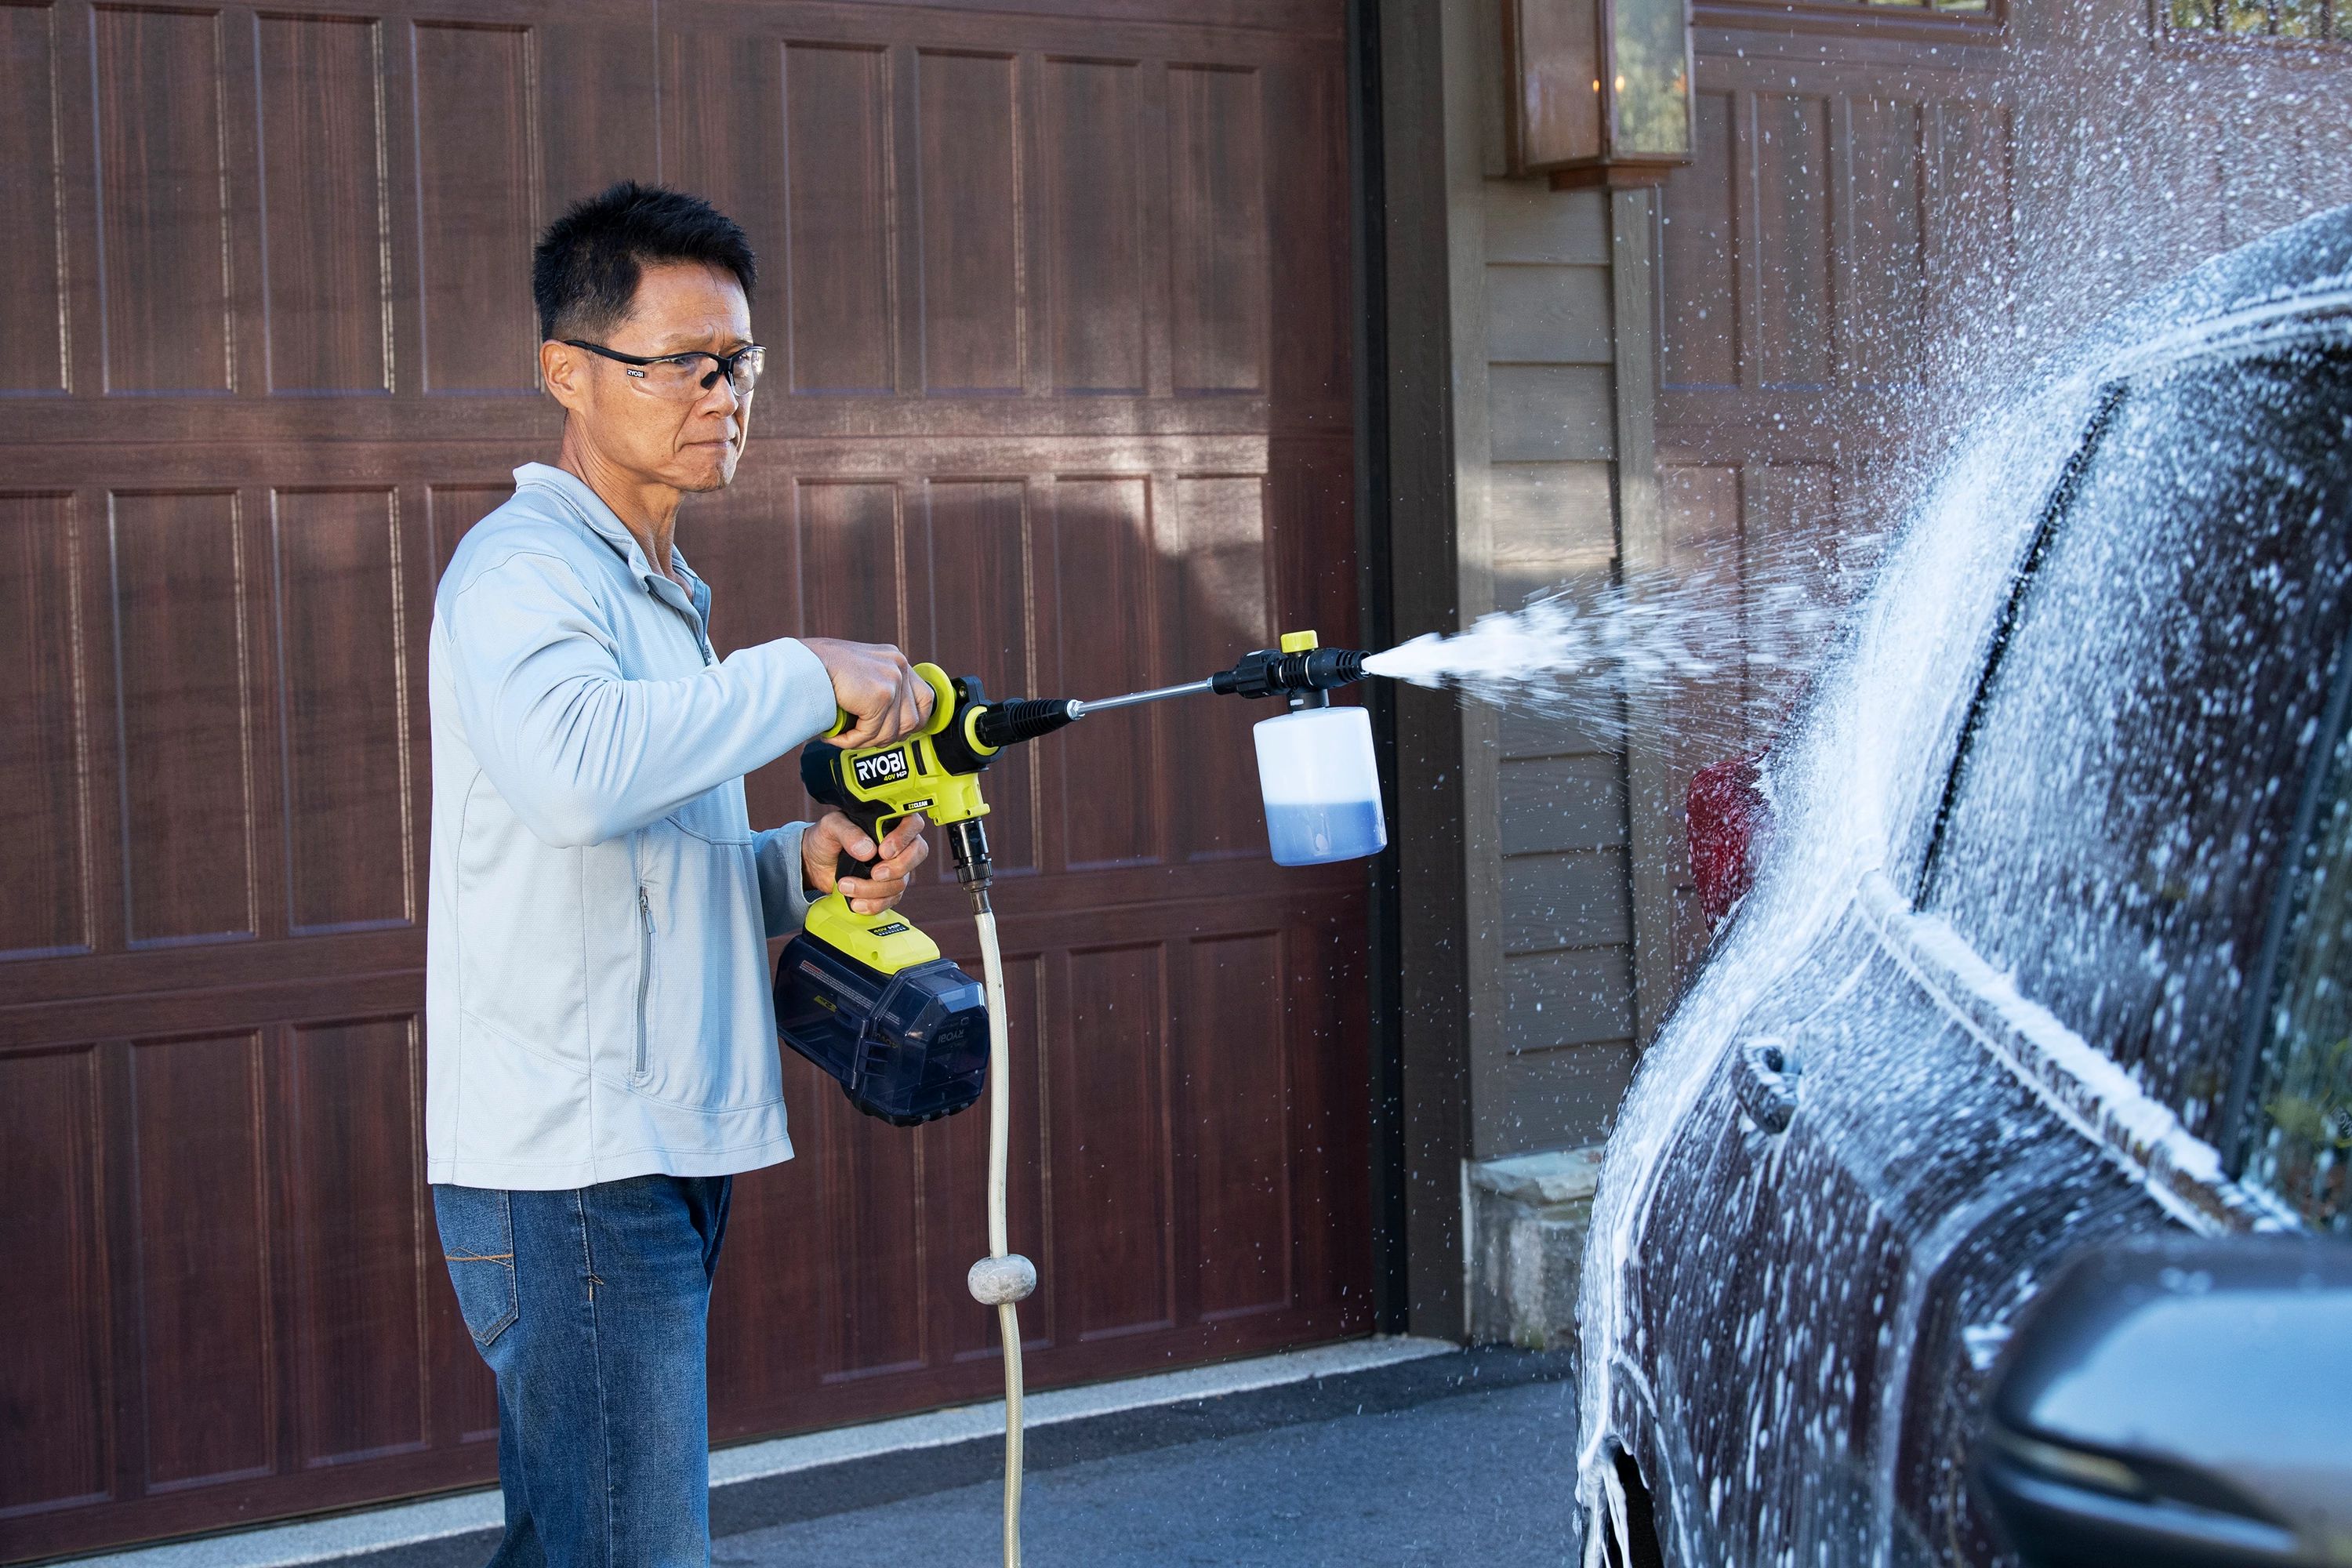 40V HP Technology Delivers 600 PSI for Powerful, Portable Cleaning